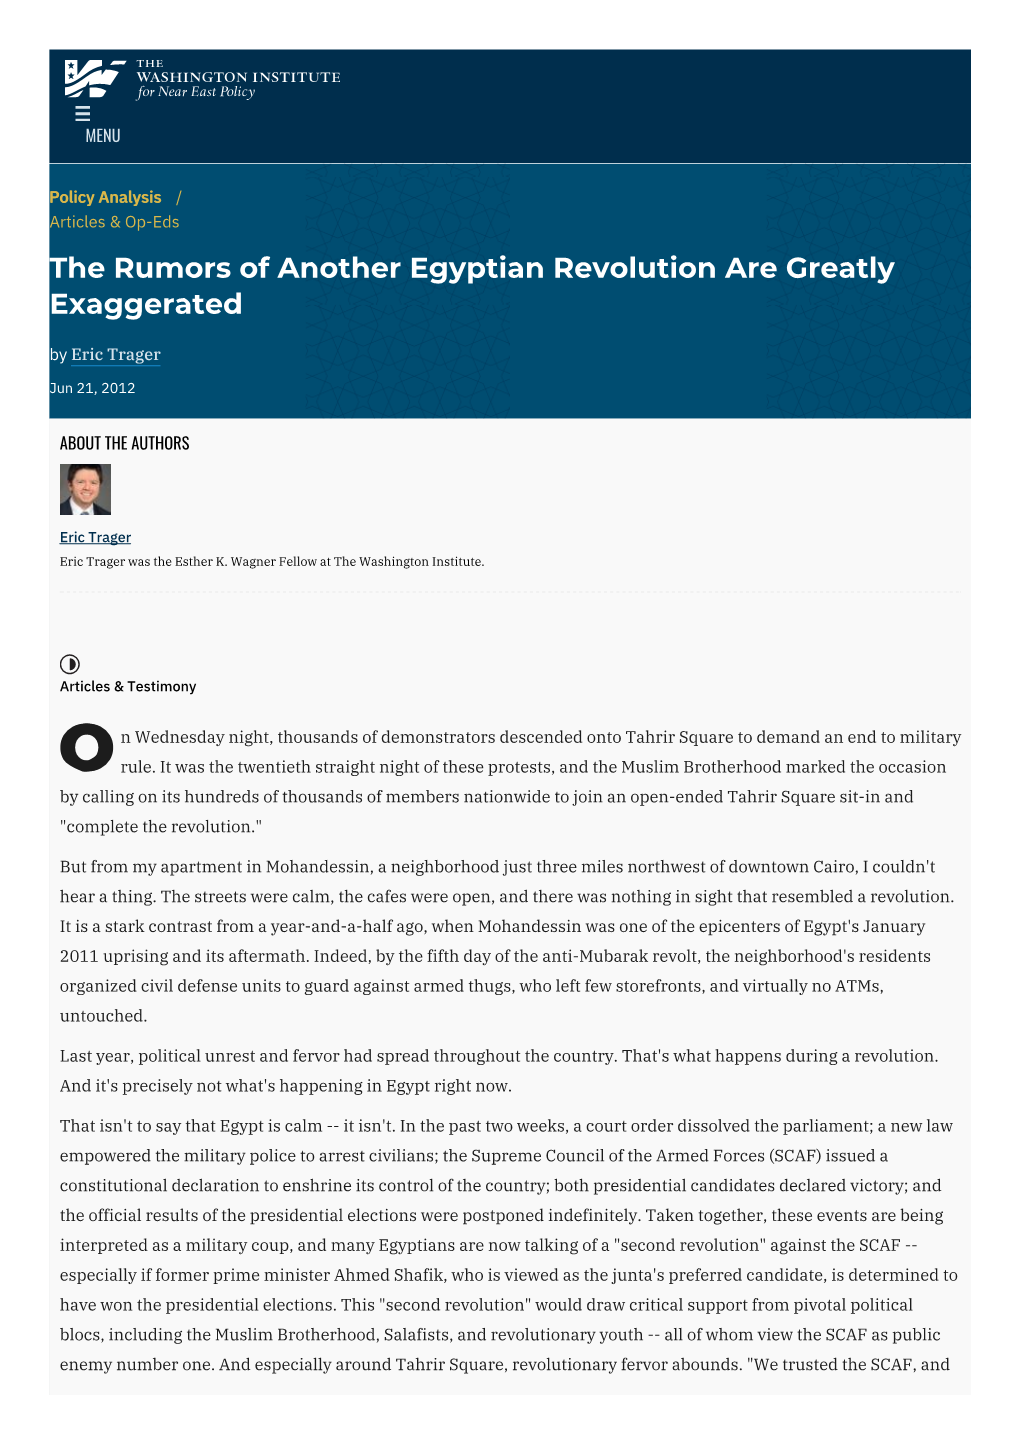 The Rumors of Another Egyptian Revolution Are Greatly Exaggerated by Eric Trager